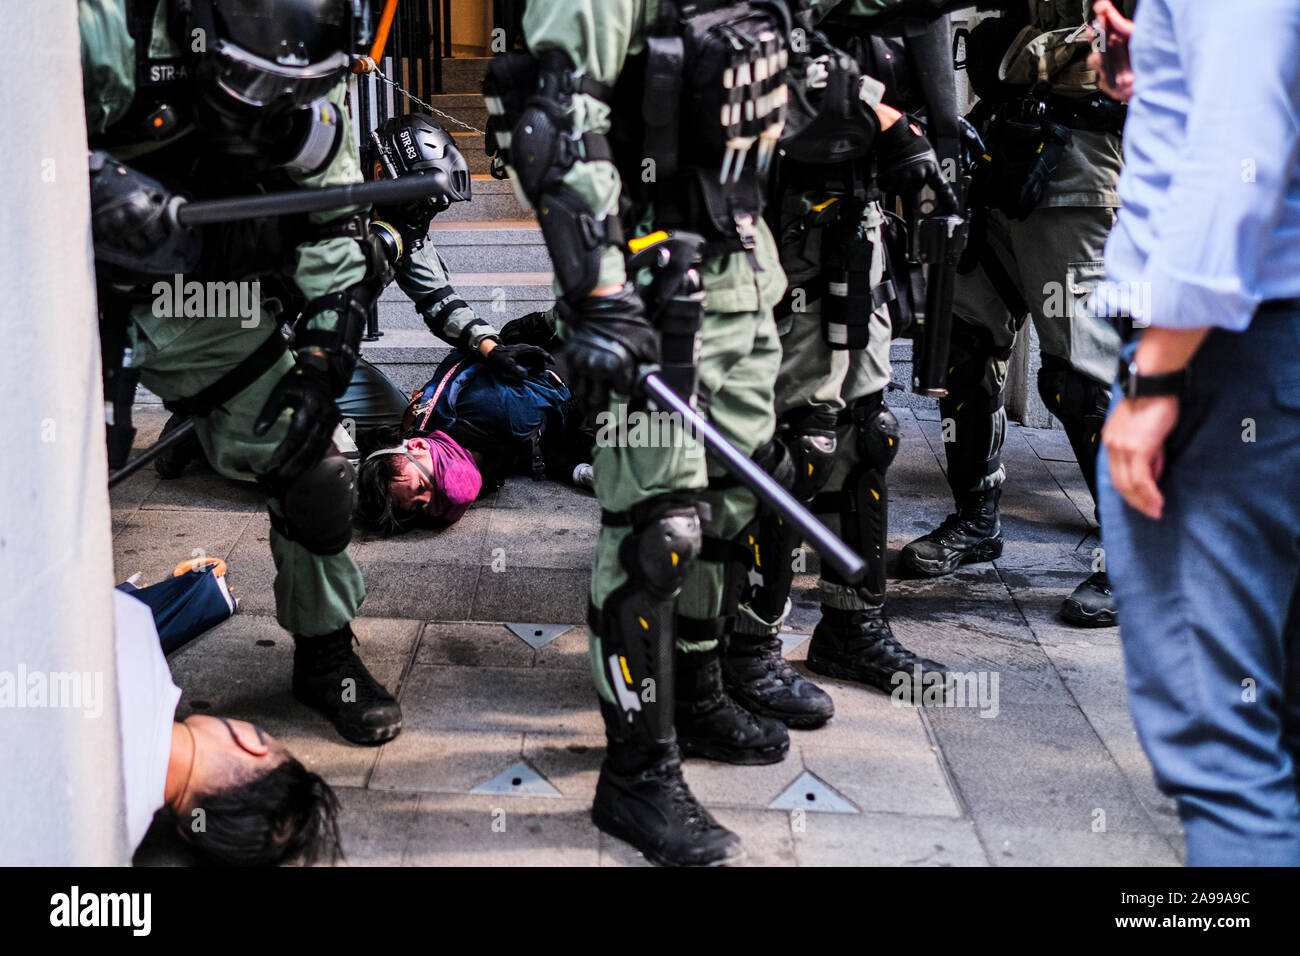 Hong Kong, China. 13th Nov, 2019. Riot police arrest protesters during a protest in the Central district Hong Kong. A 'Blossom Everywhere' action was organized by the protestors to paralyze traffic and vandalize things across Hong Kong for its third consecutive days and have sparked some of the worst violence in five months of unrest. Credit: SOPA Images Limited/Alamy Live News Stock Photo